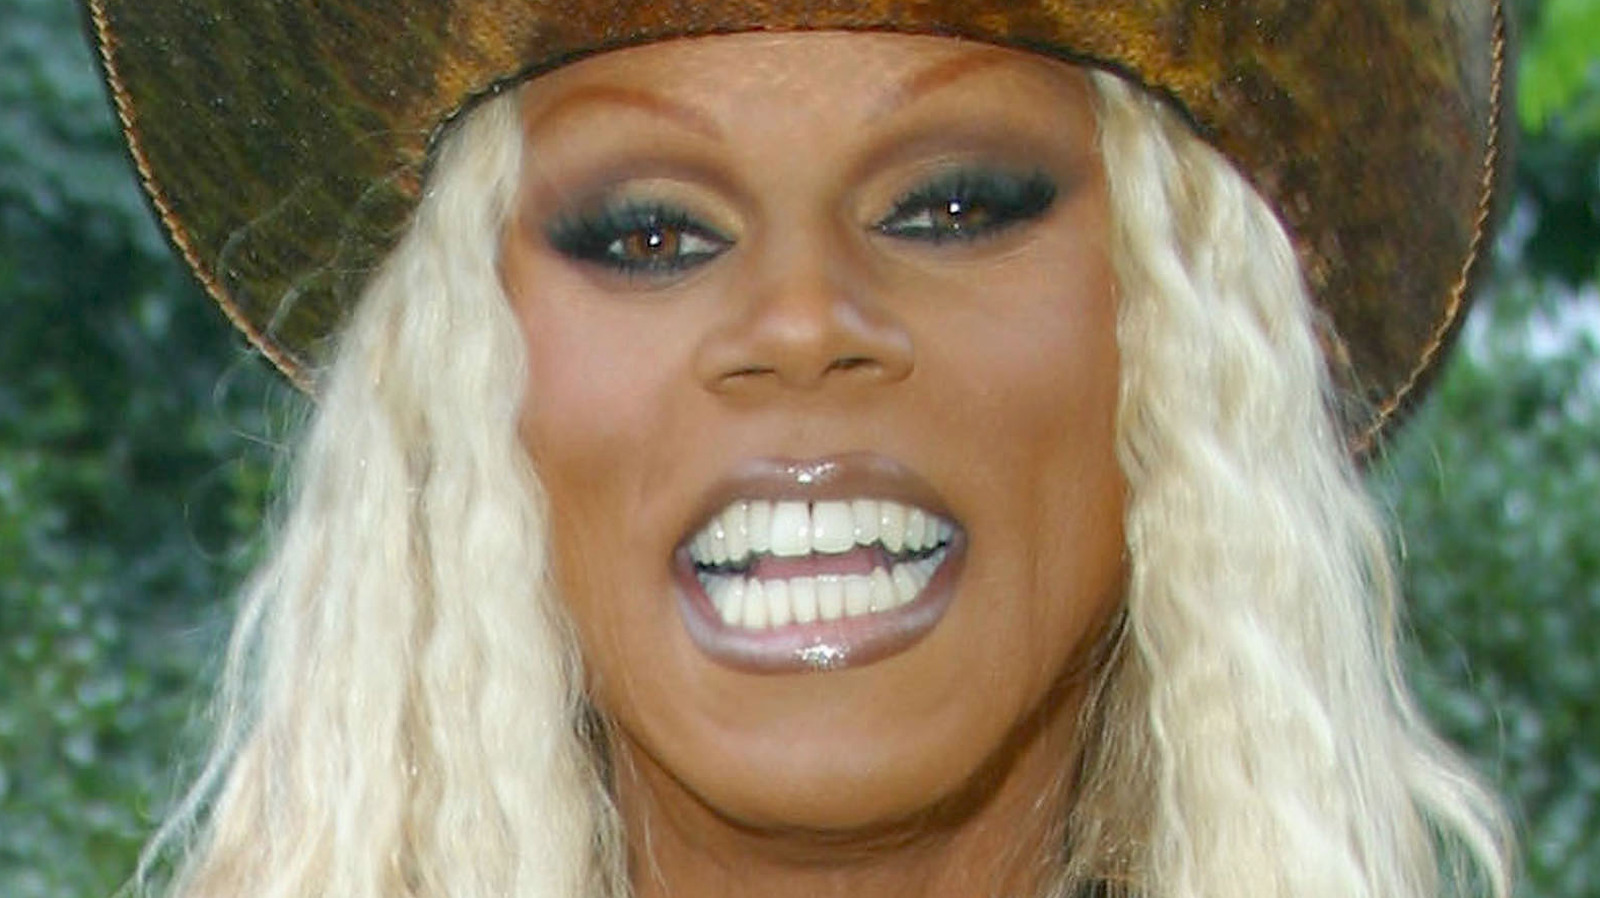 This is what RuPaul looks like without makeup